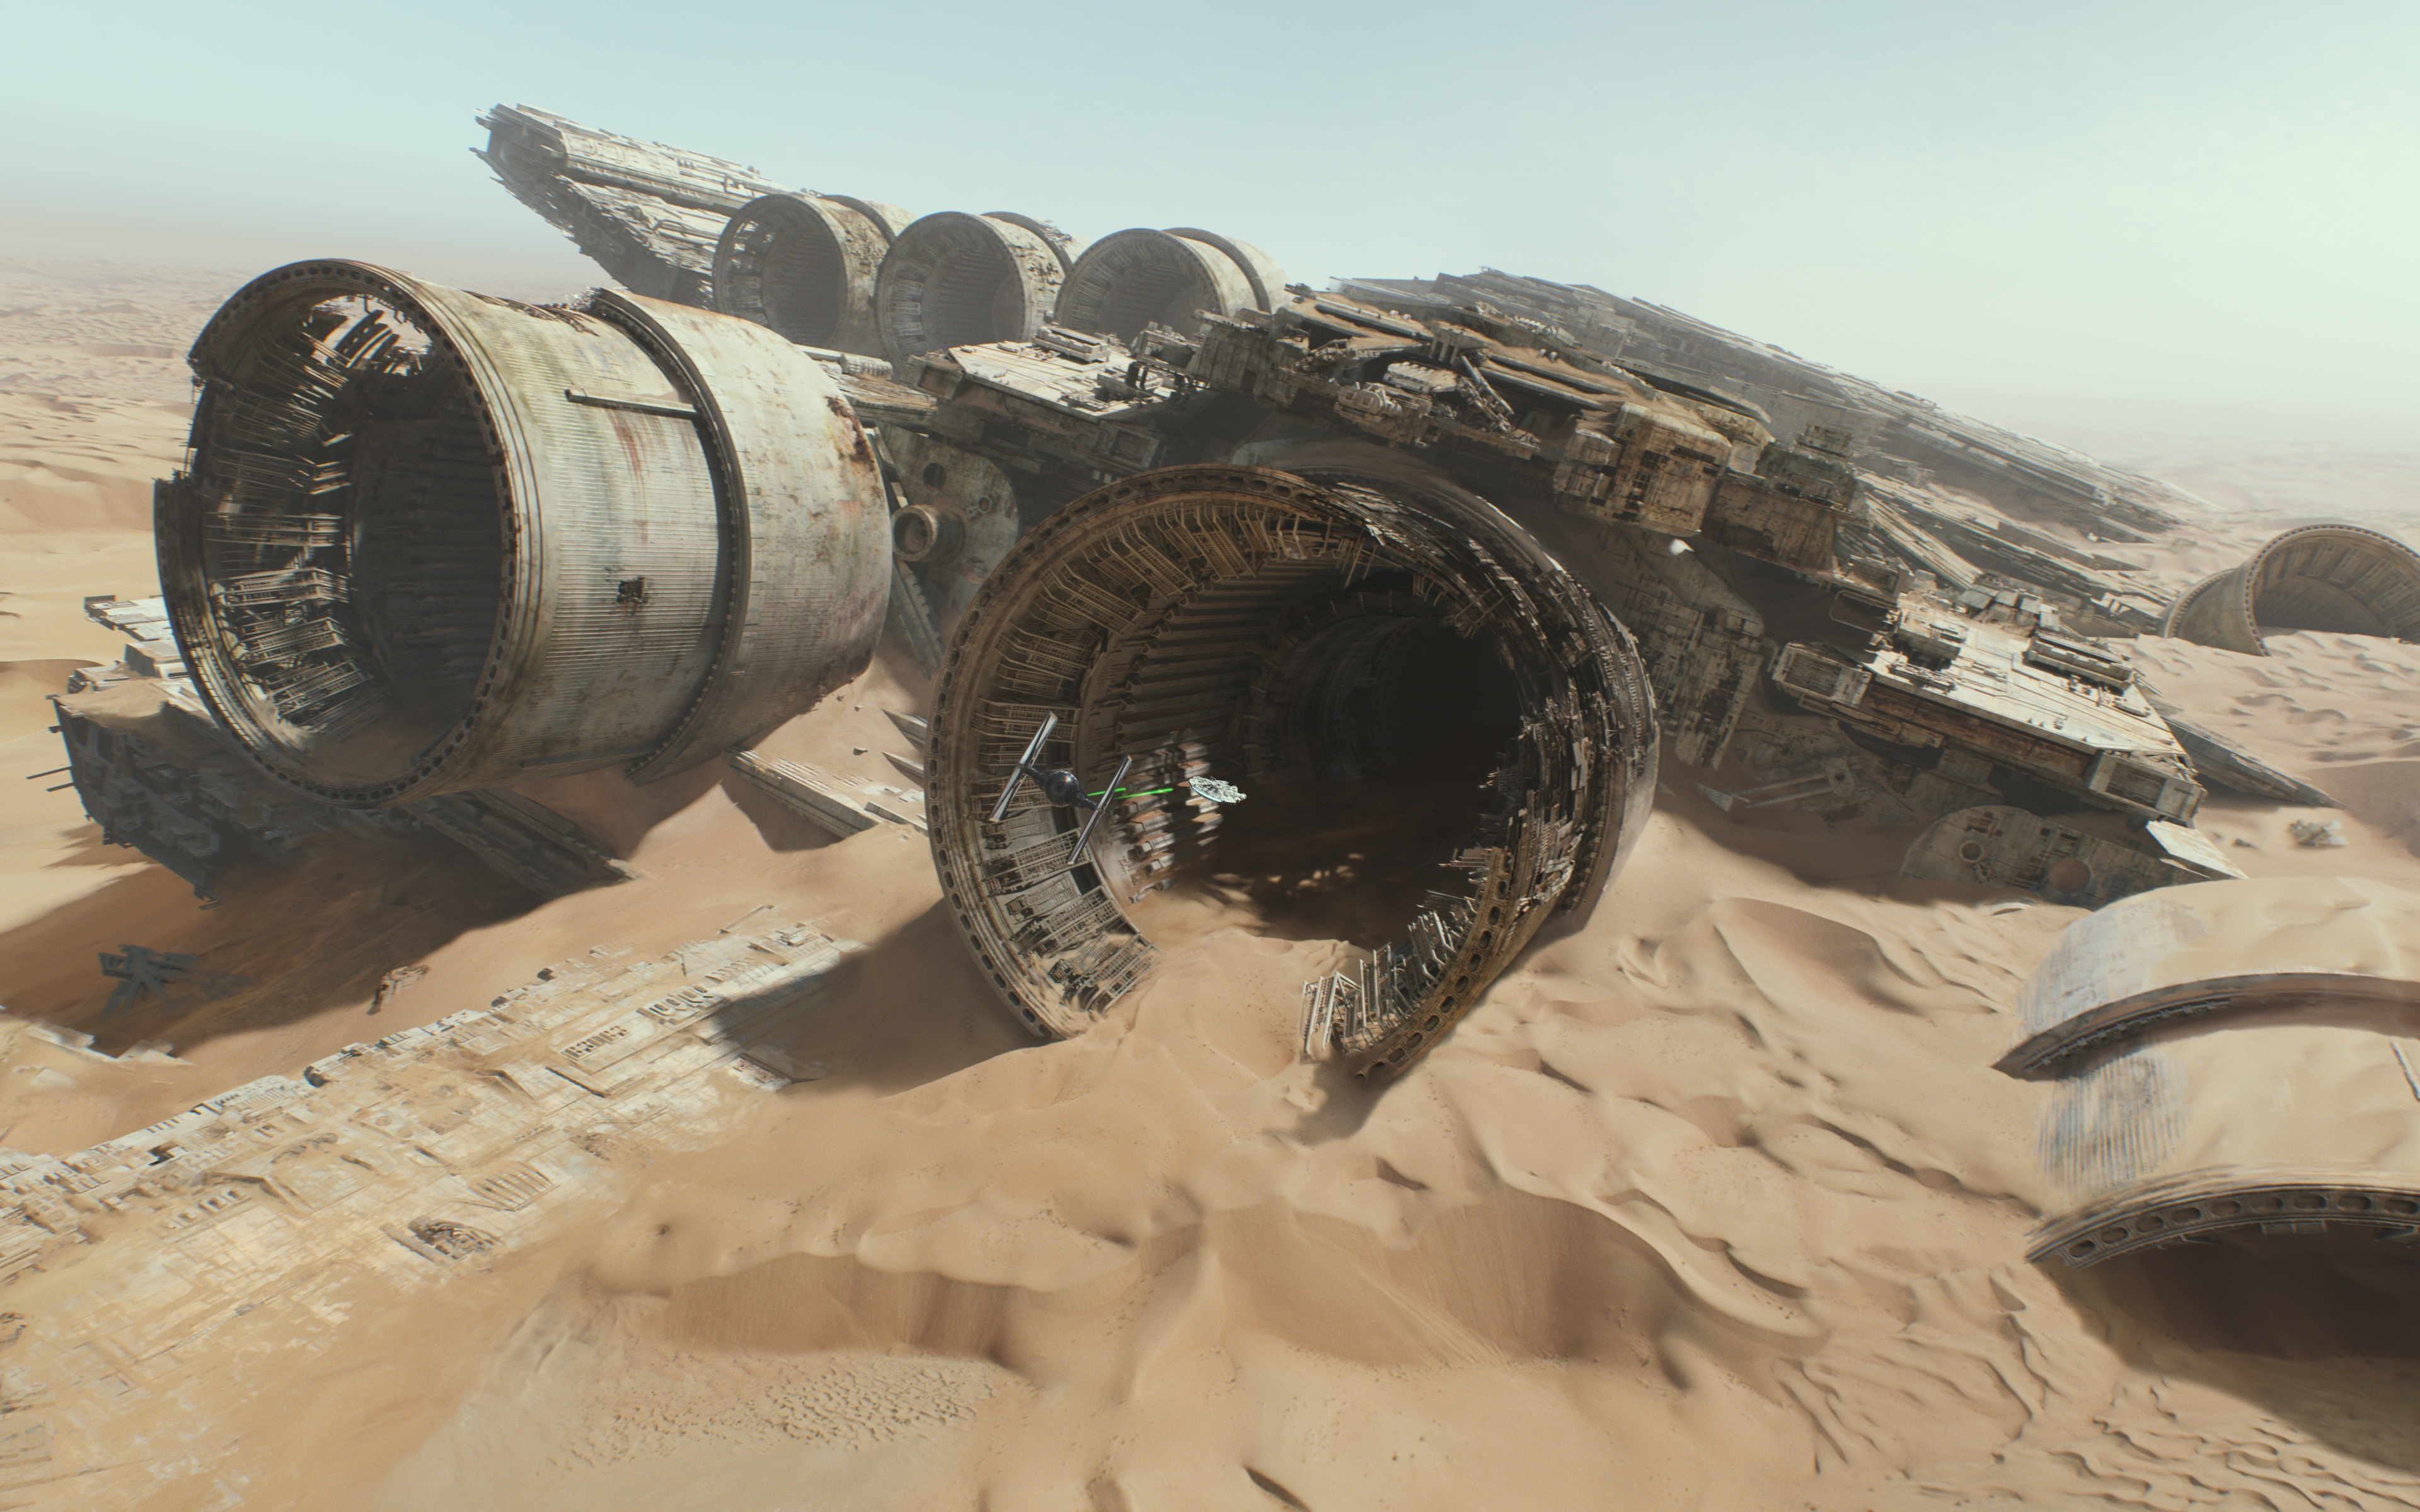 Star Wars The Force Awakens Ship for 3840 x 2400 Widescreen resolution